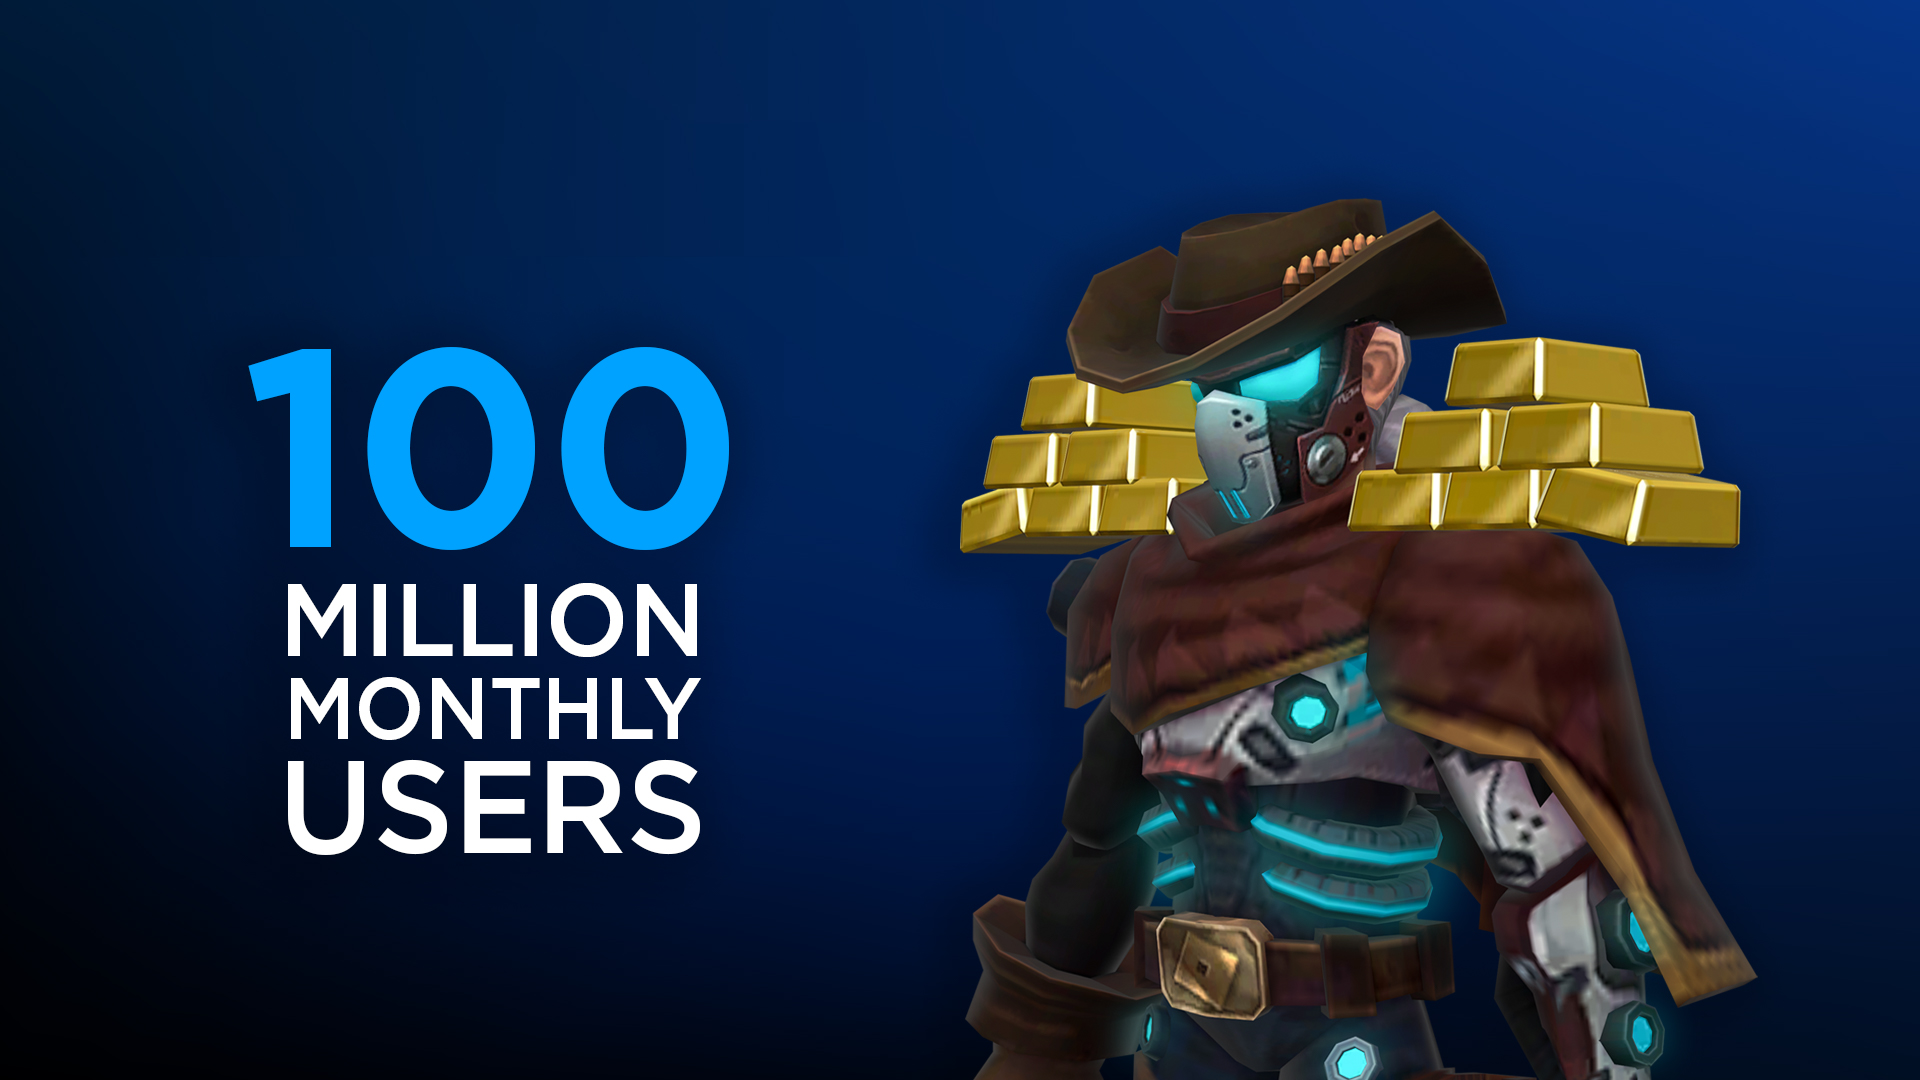 roblox worldwide users monthly hits million looks employees own